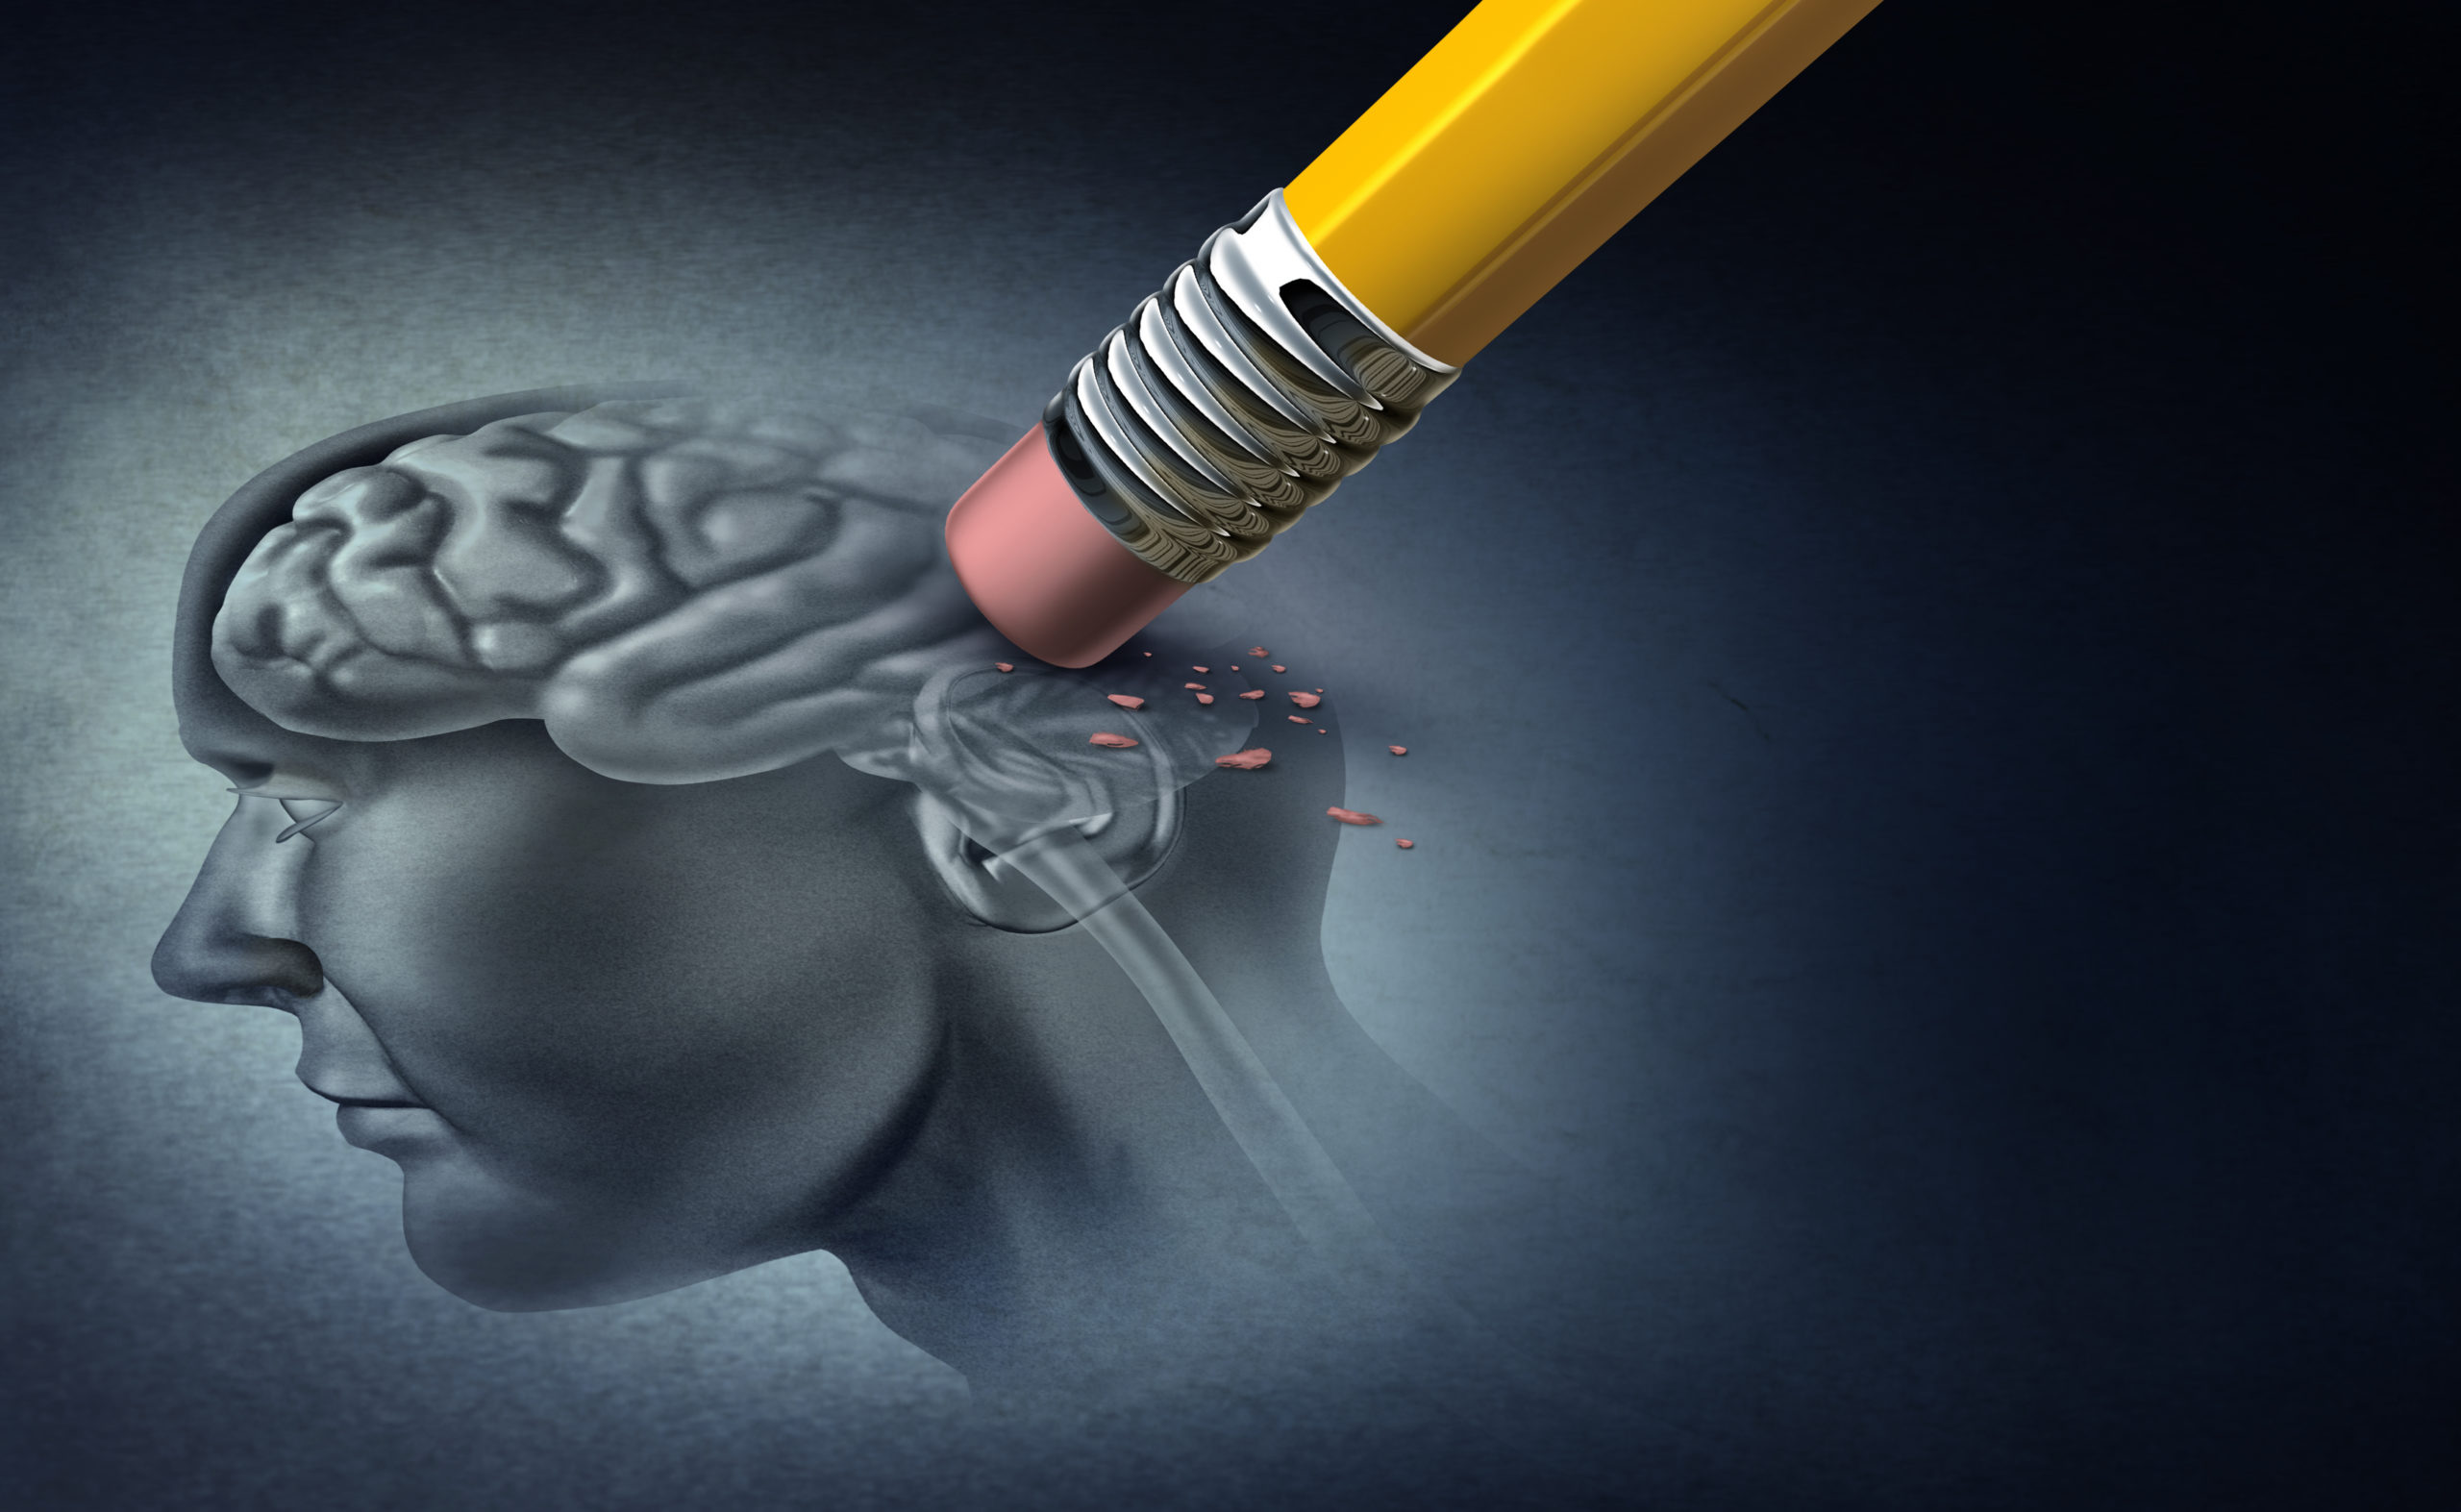 Concept of memory loss and dementia disease and losing brain function memories as an alzheimers health symbol of neurology and mental problems with 3D illustration elements.